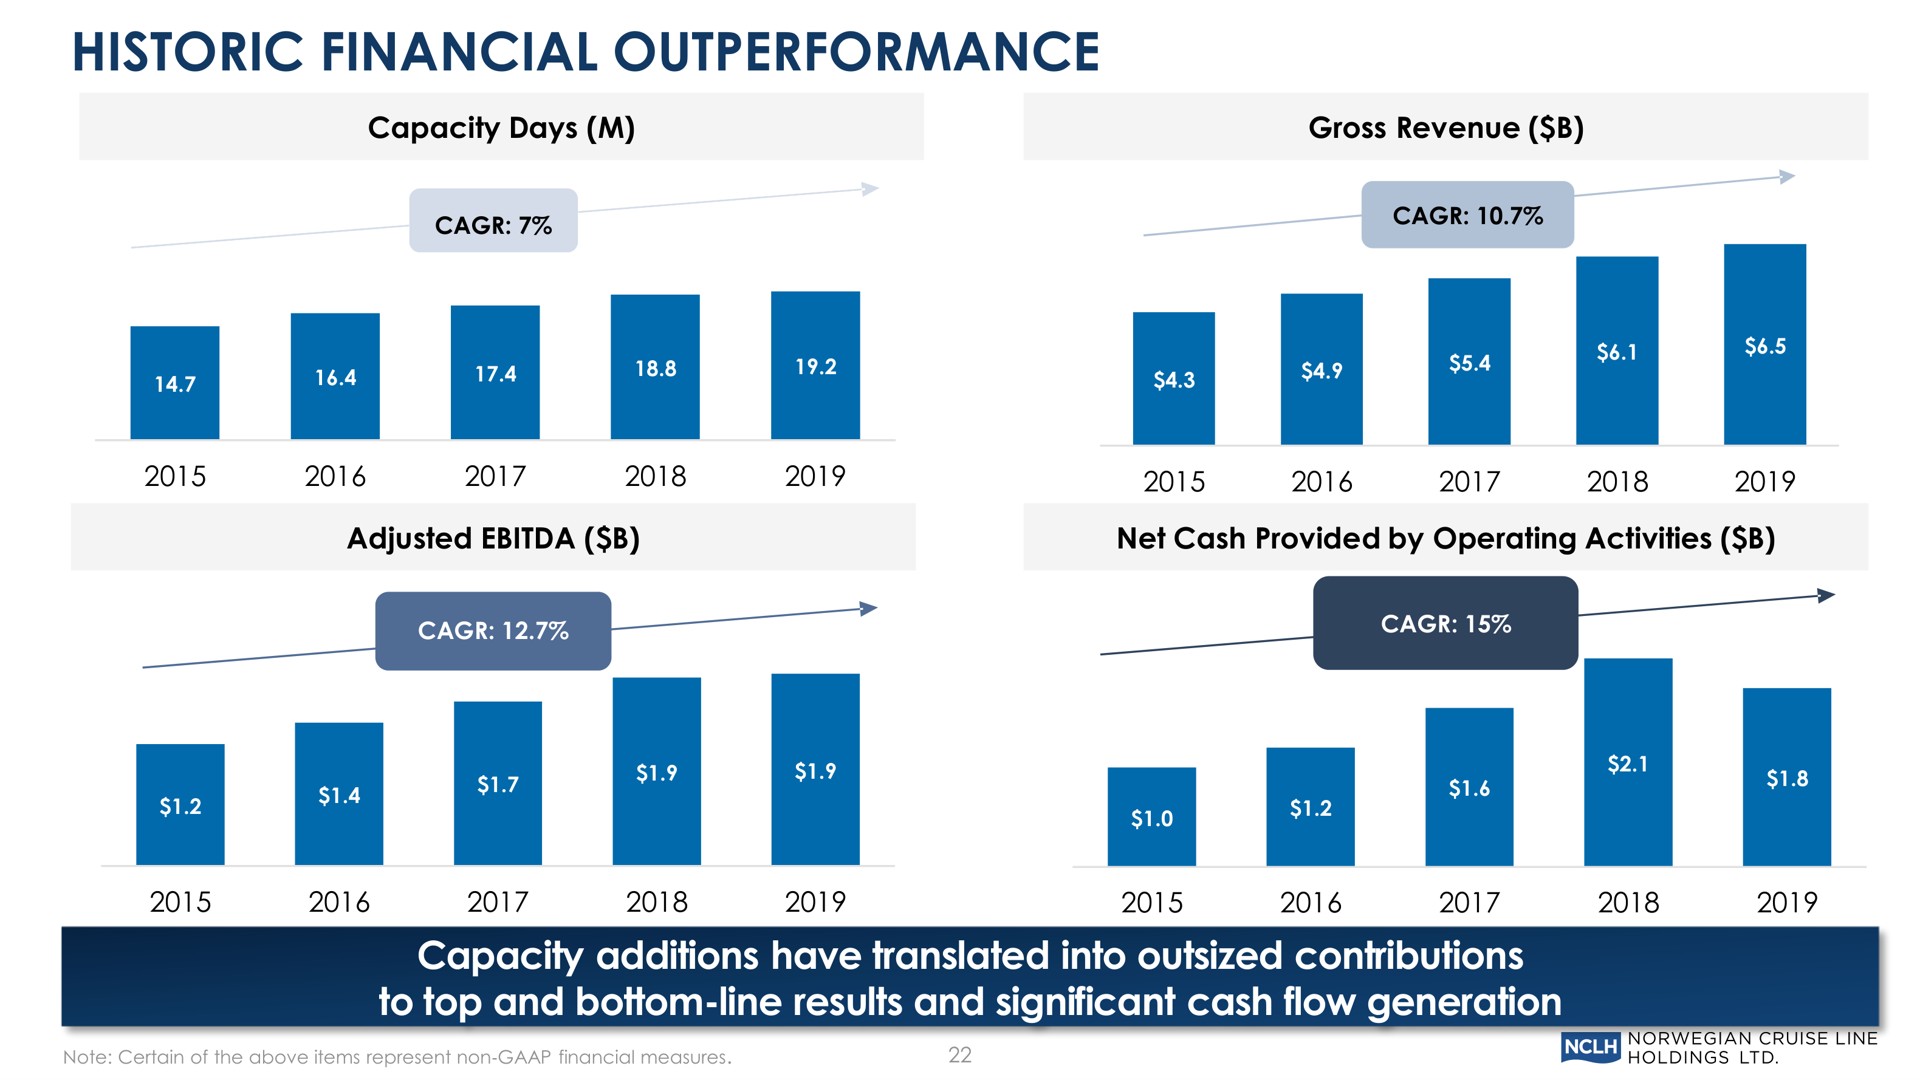 historic financial capacity additions have translated into outsized contributions to top and bottom line results and significant cash flow generation | Norwegian Cruise Line